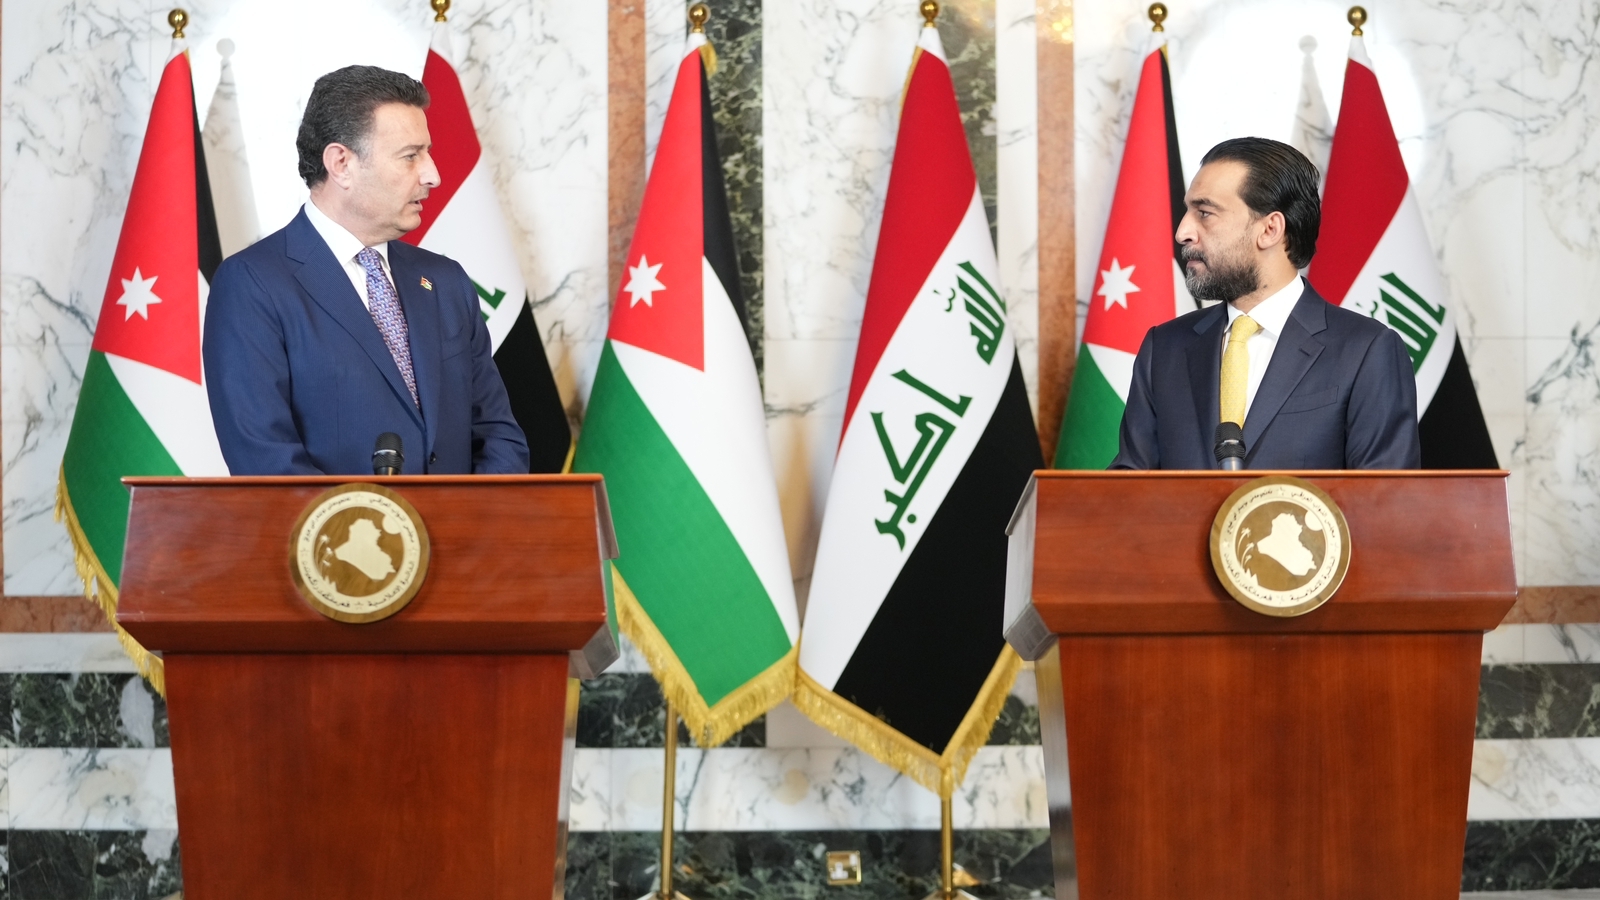 Iraq and Jordan to start implementing the electrical grid project soon